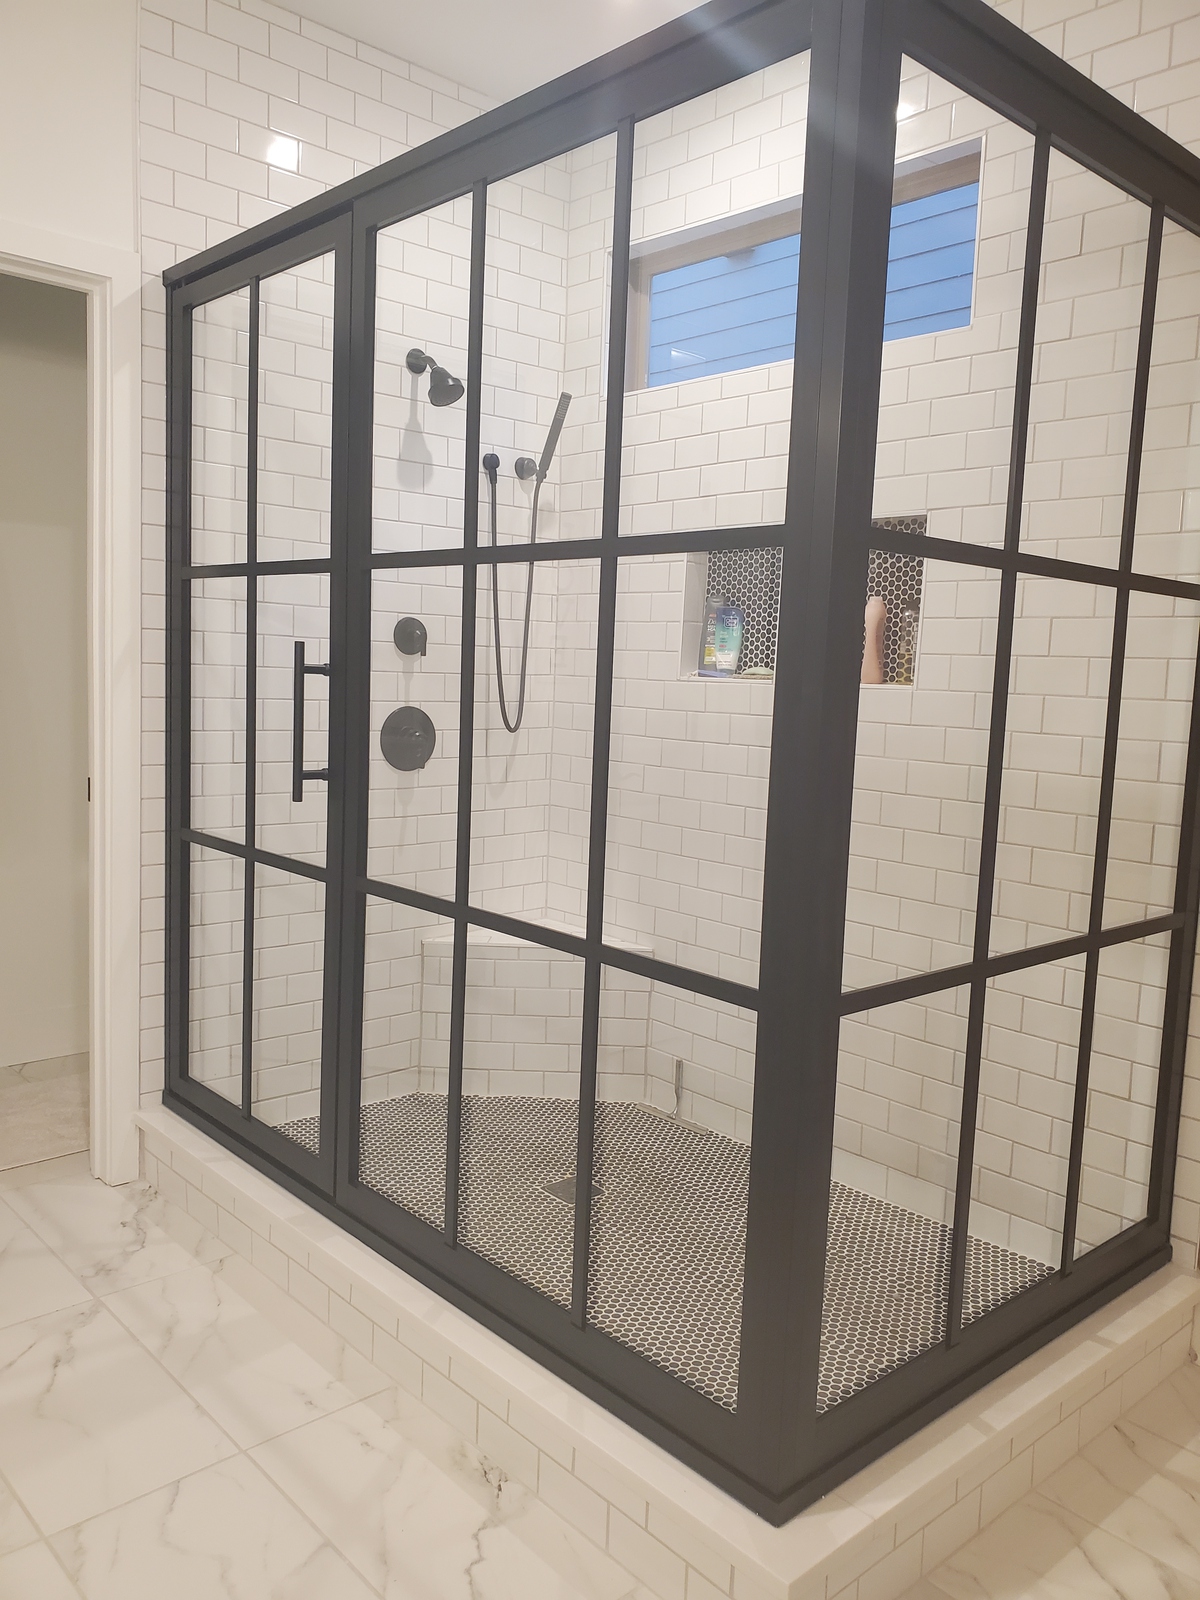 This Coastal gridscape shower is the real deal! This is a framed enclosure which adds to the dimensional appearance of the grids. The grids are only applied to the outside of the shower enclosure to ensure cleaning is a breeze!